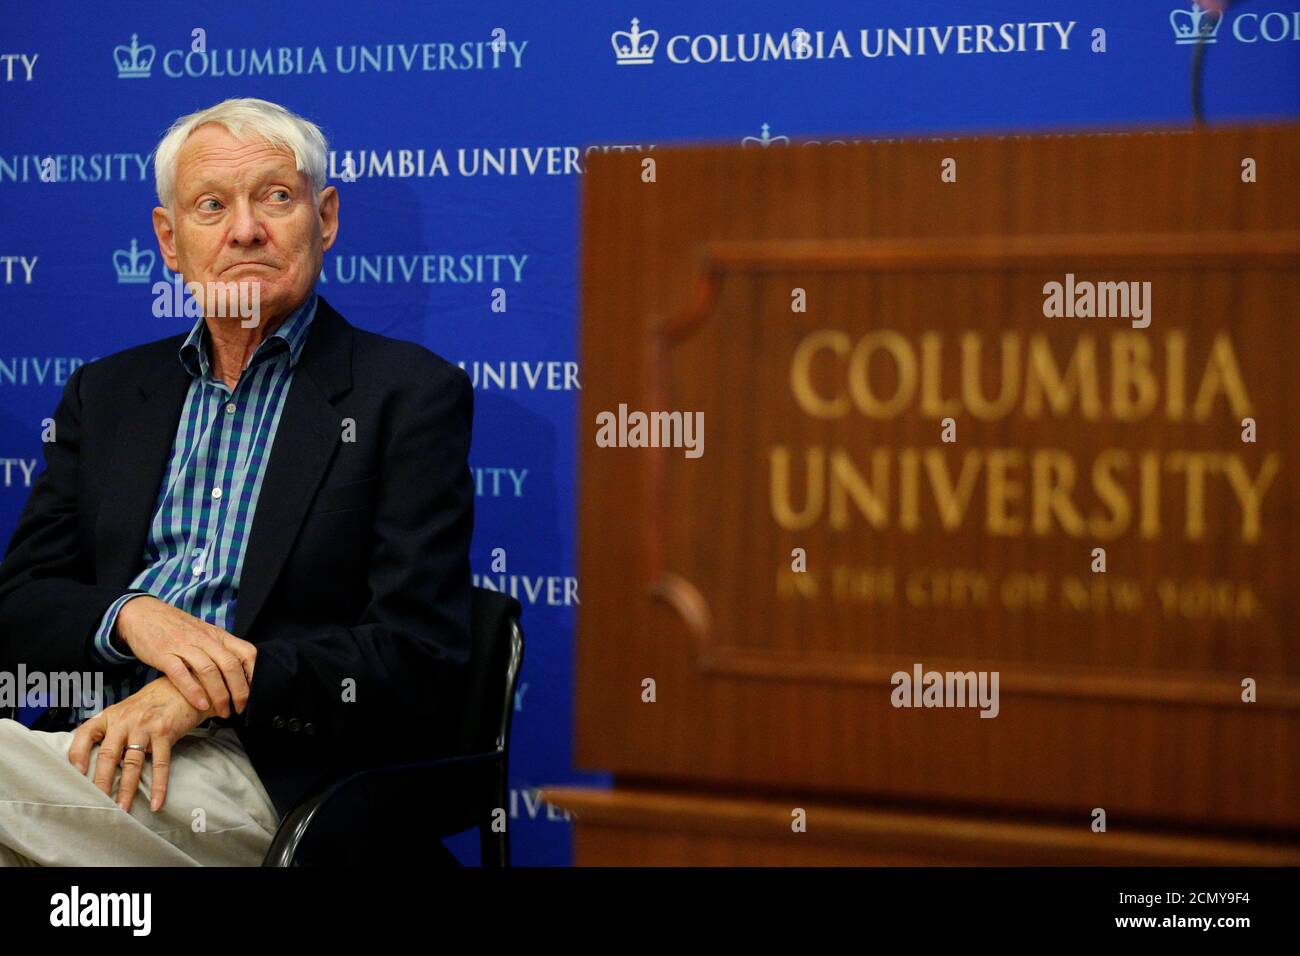 Columbia University professor Joachim Frank attends a news conference after winning 2017 Nobel Prize in chemistry for developing cryo-electron microscopy which simplifies and improves the imaging of biomolecules, at Columbia University in New York City, U.S., October 4, 2017. REUTERS/Brendan McDermid Stock Photo